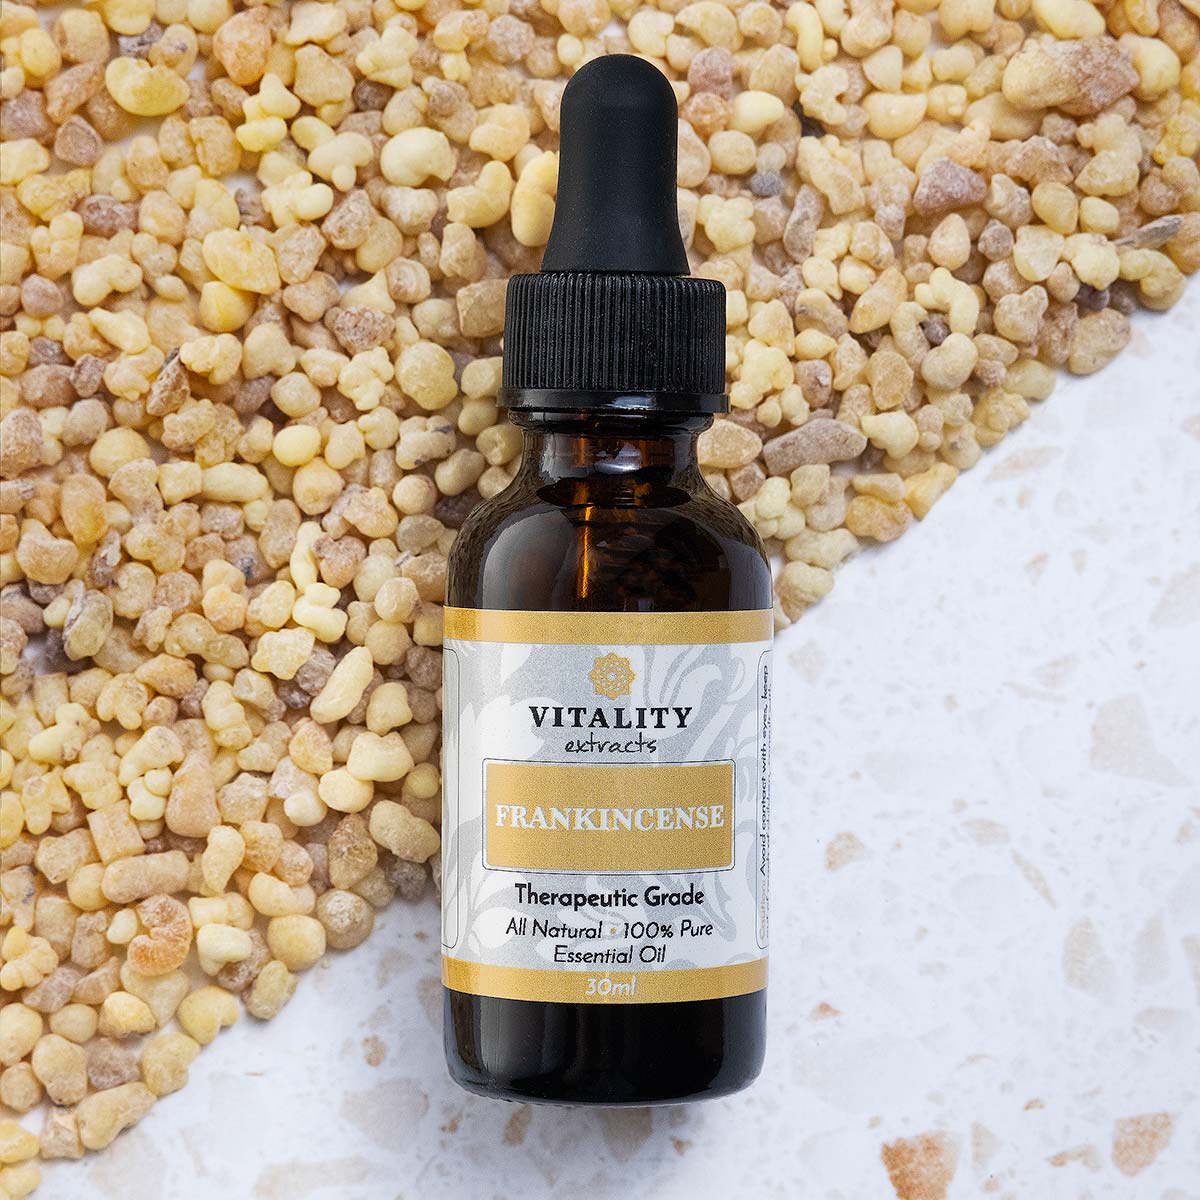 Vitality Extracts IMMUNITY Therapeutic Grade Essential Oil (30mL